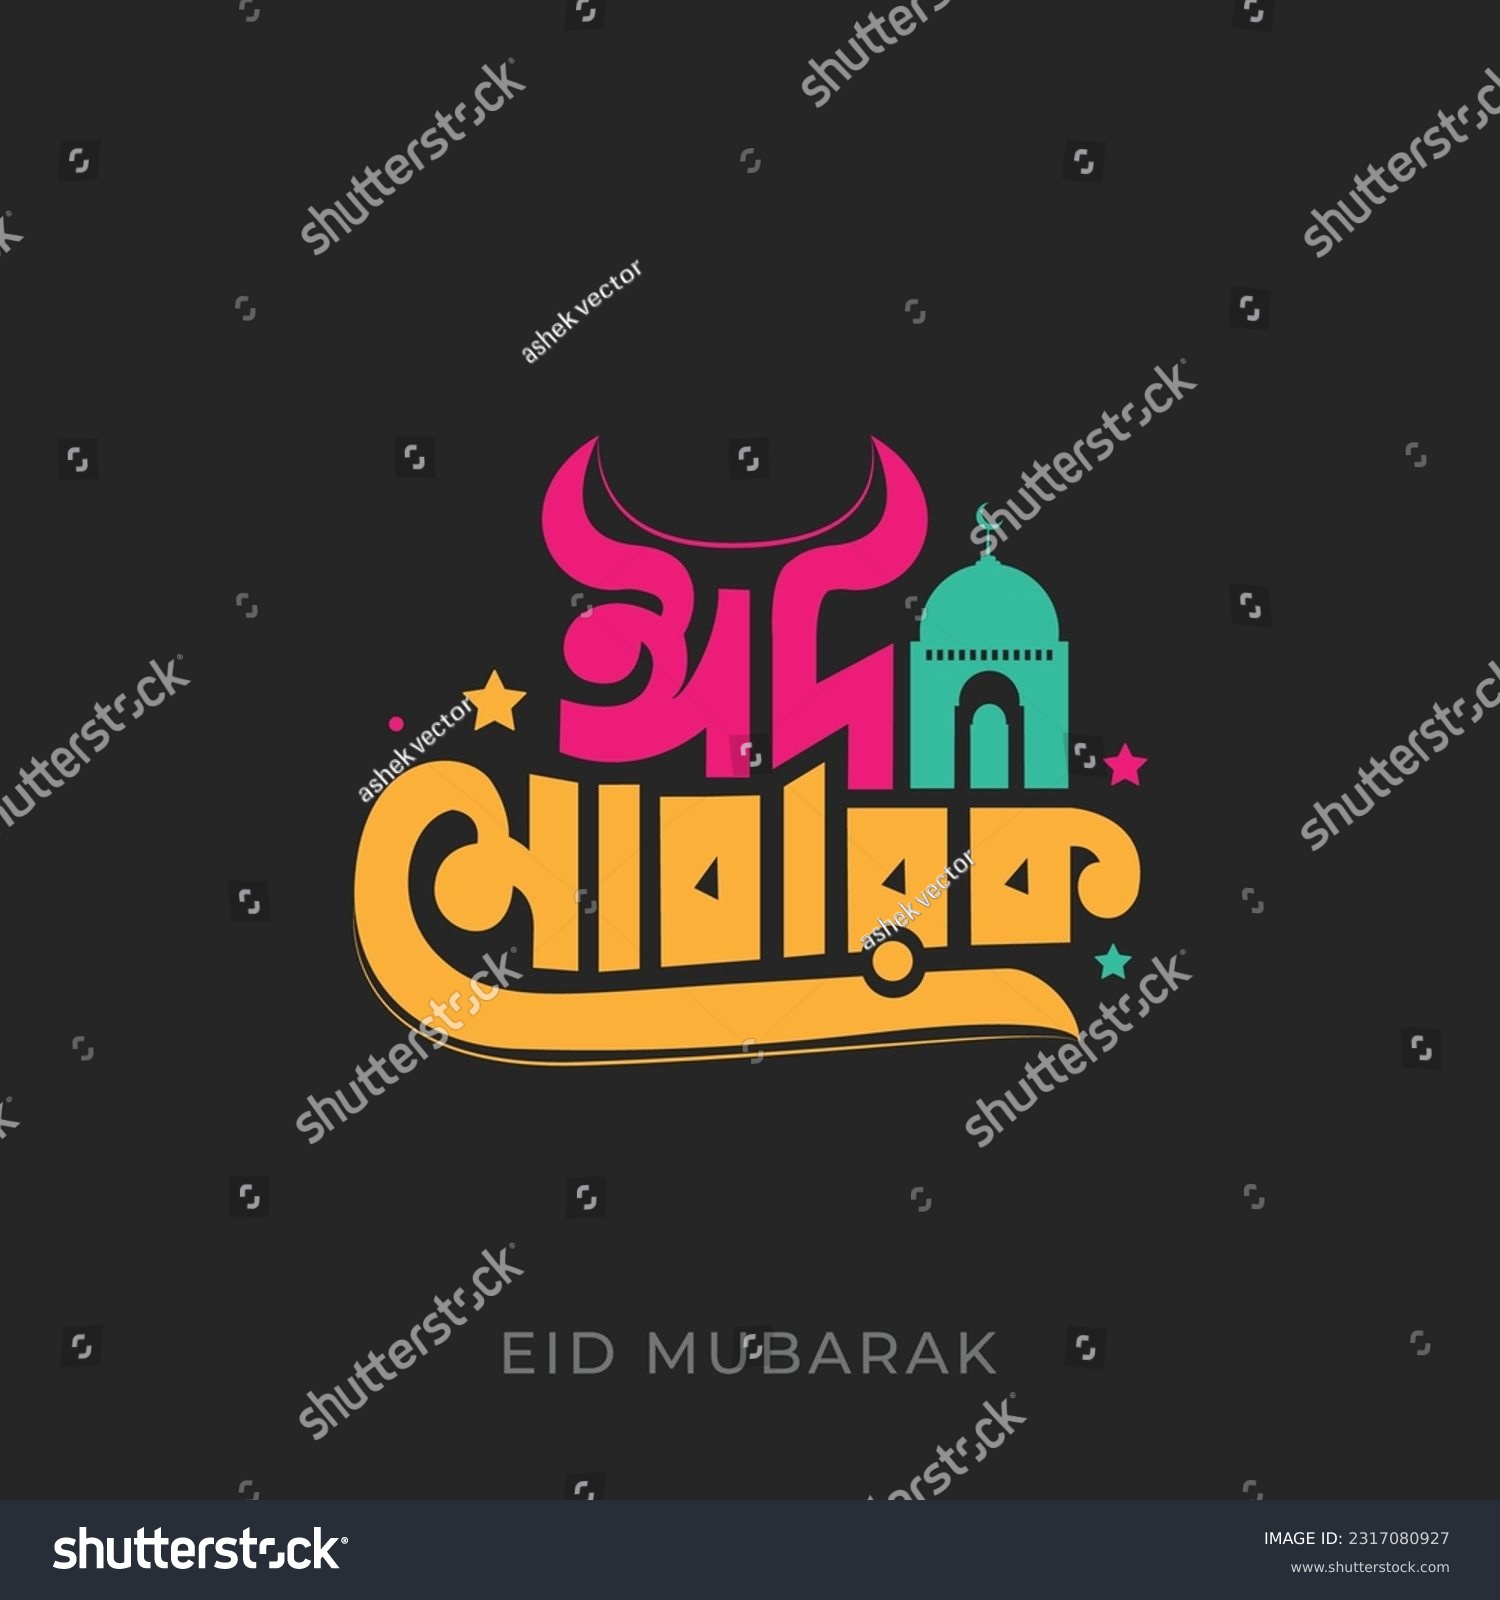 SVG of Eid Mubarak Bangla typography and lettering design to celebrate Eid UL Adha. Eid vector template design. Colorful typography design on background. Muslim religious festival.  svg